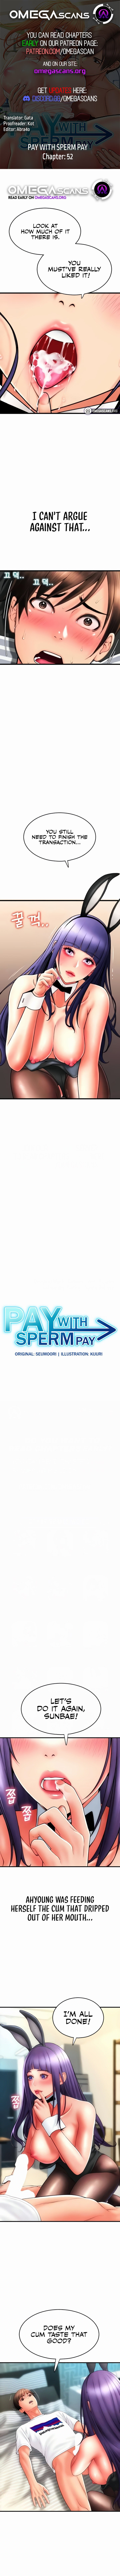 pay-with-sperm-pay-chap-52-0